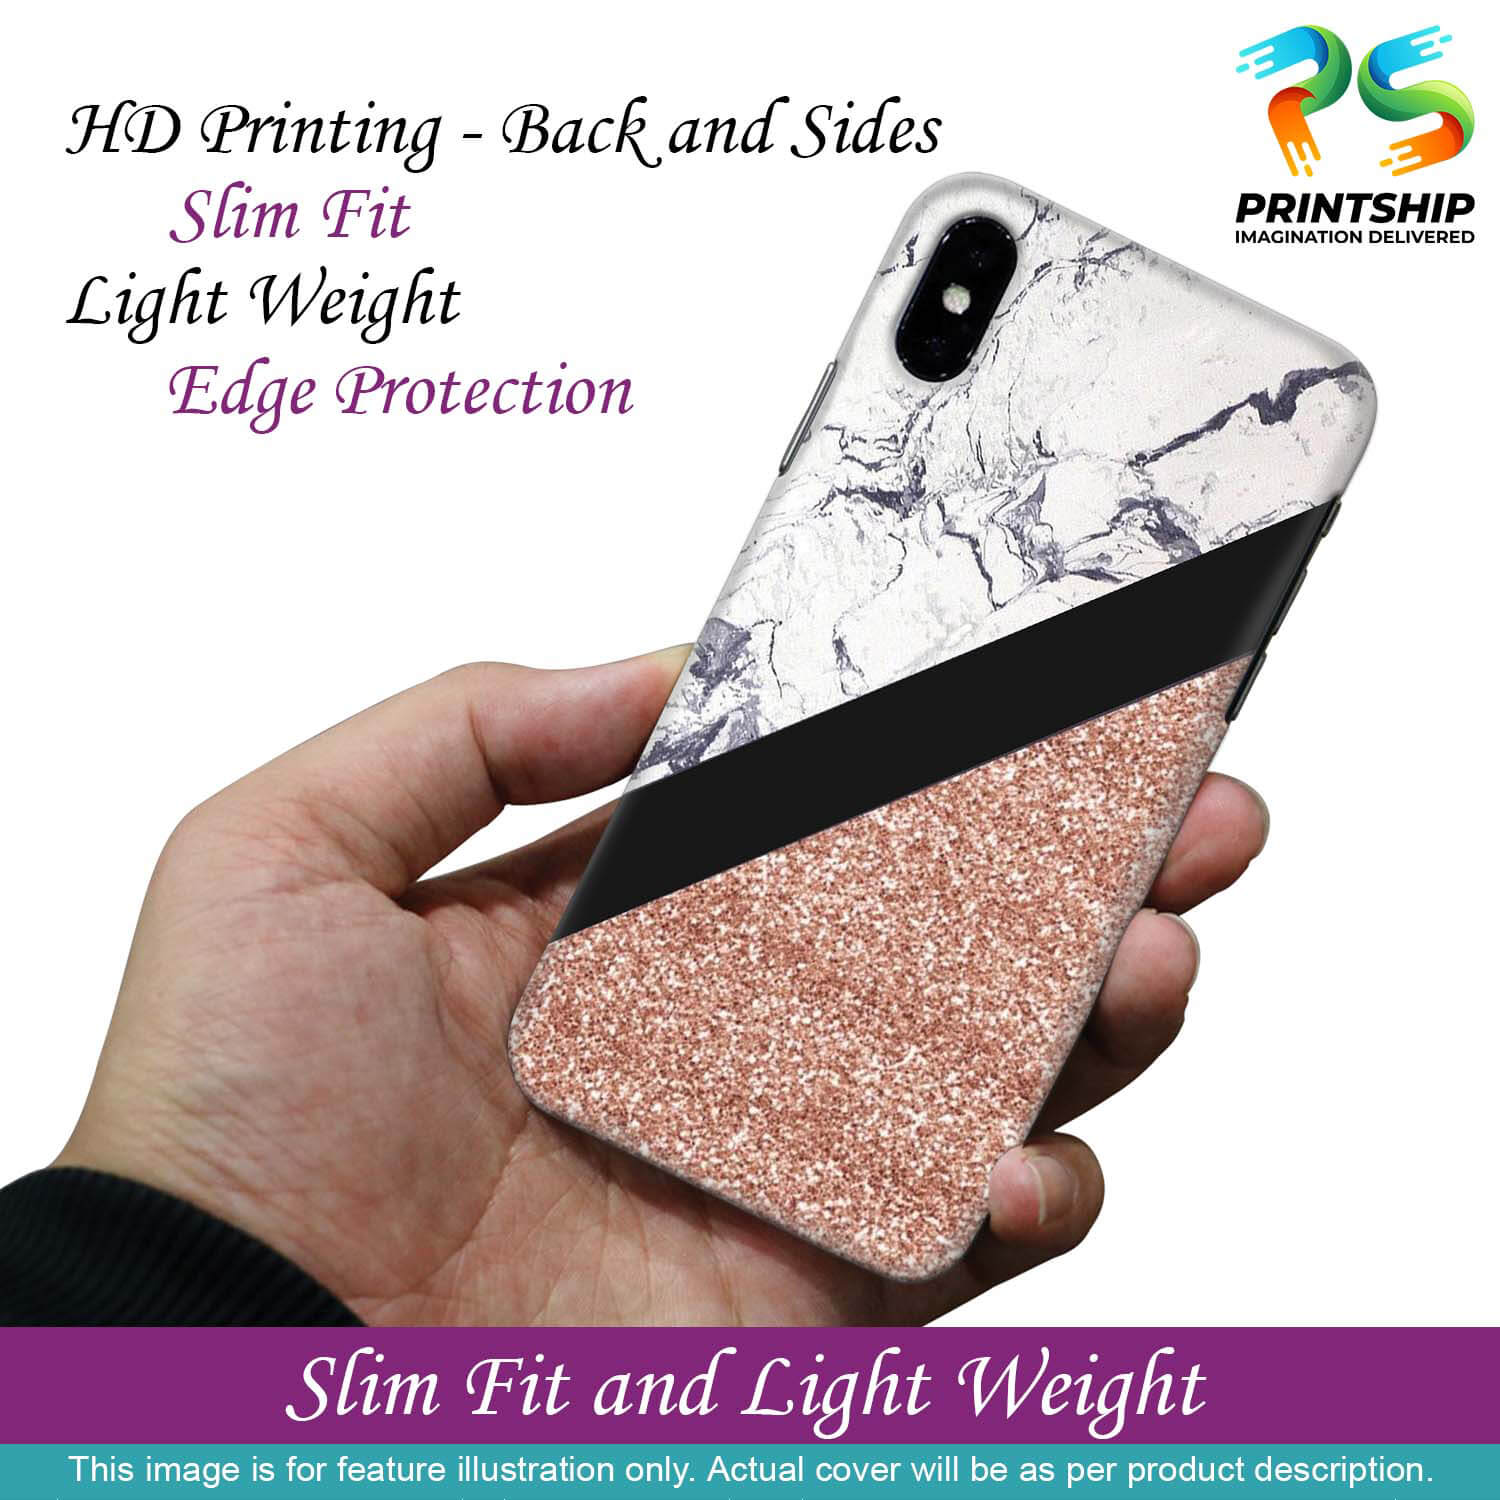 PS1331-Marble and More Back Cover for Realme XT